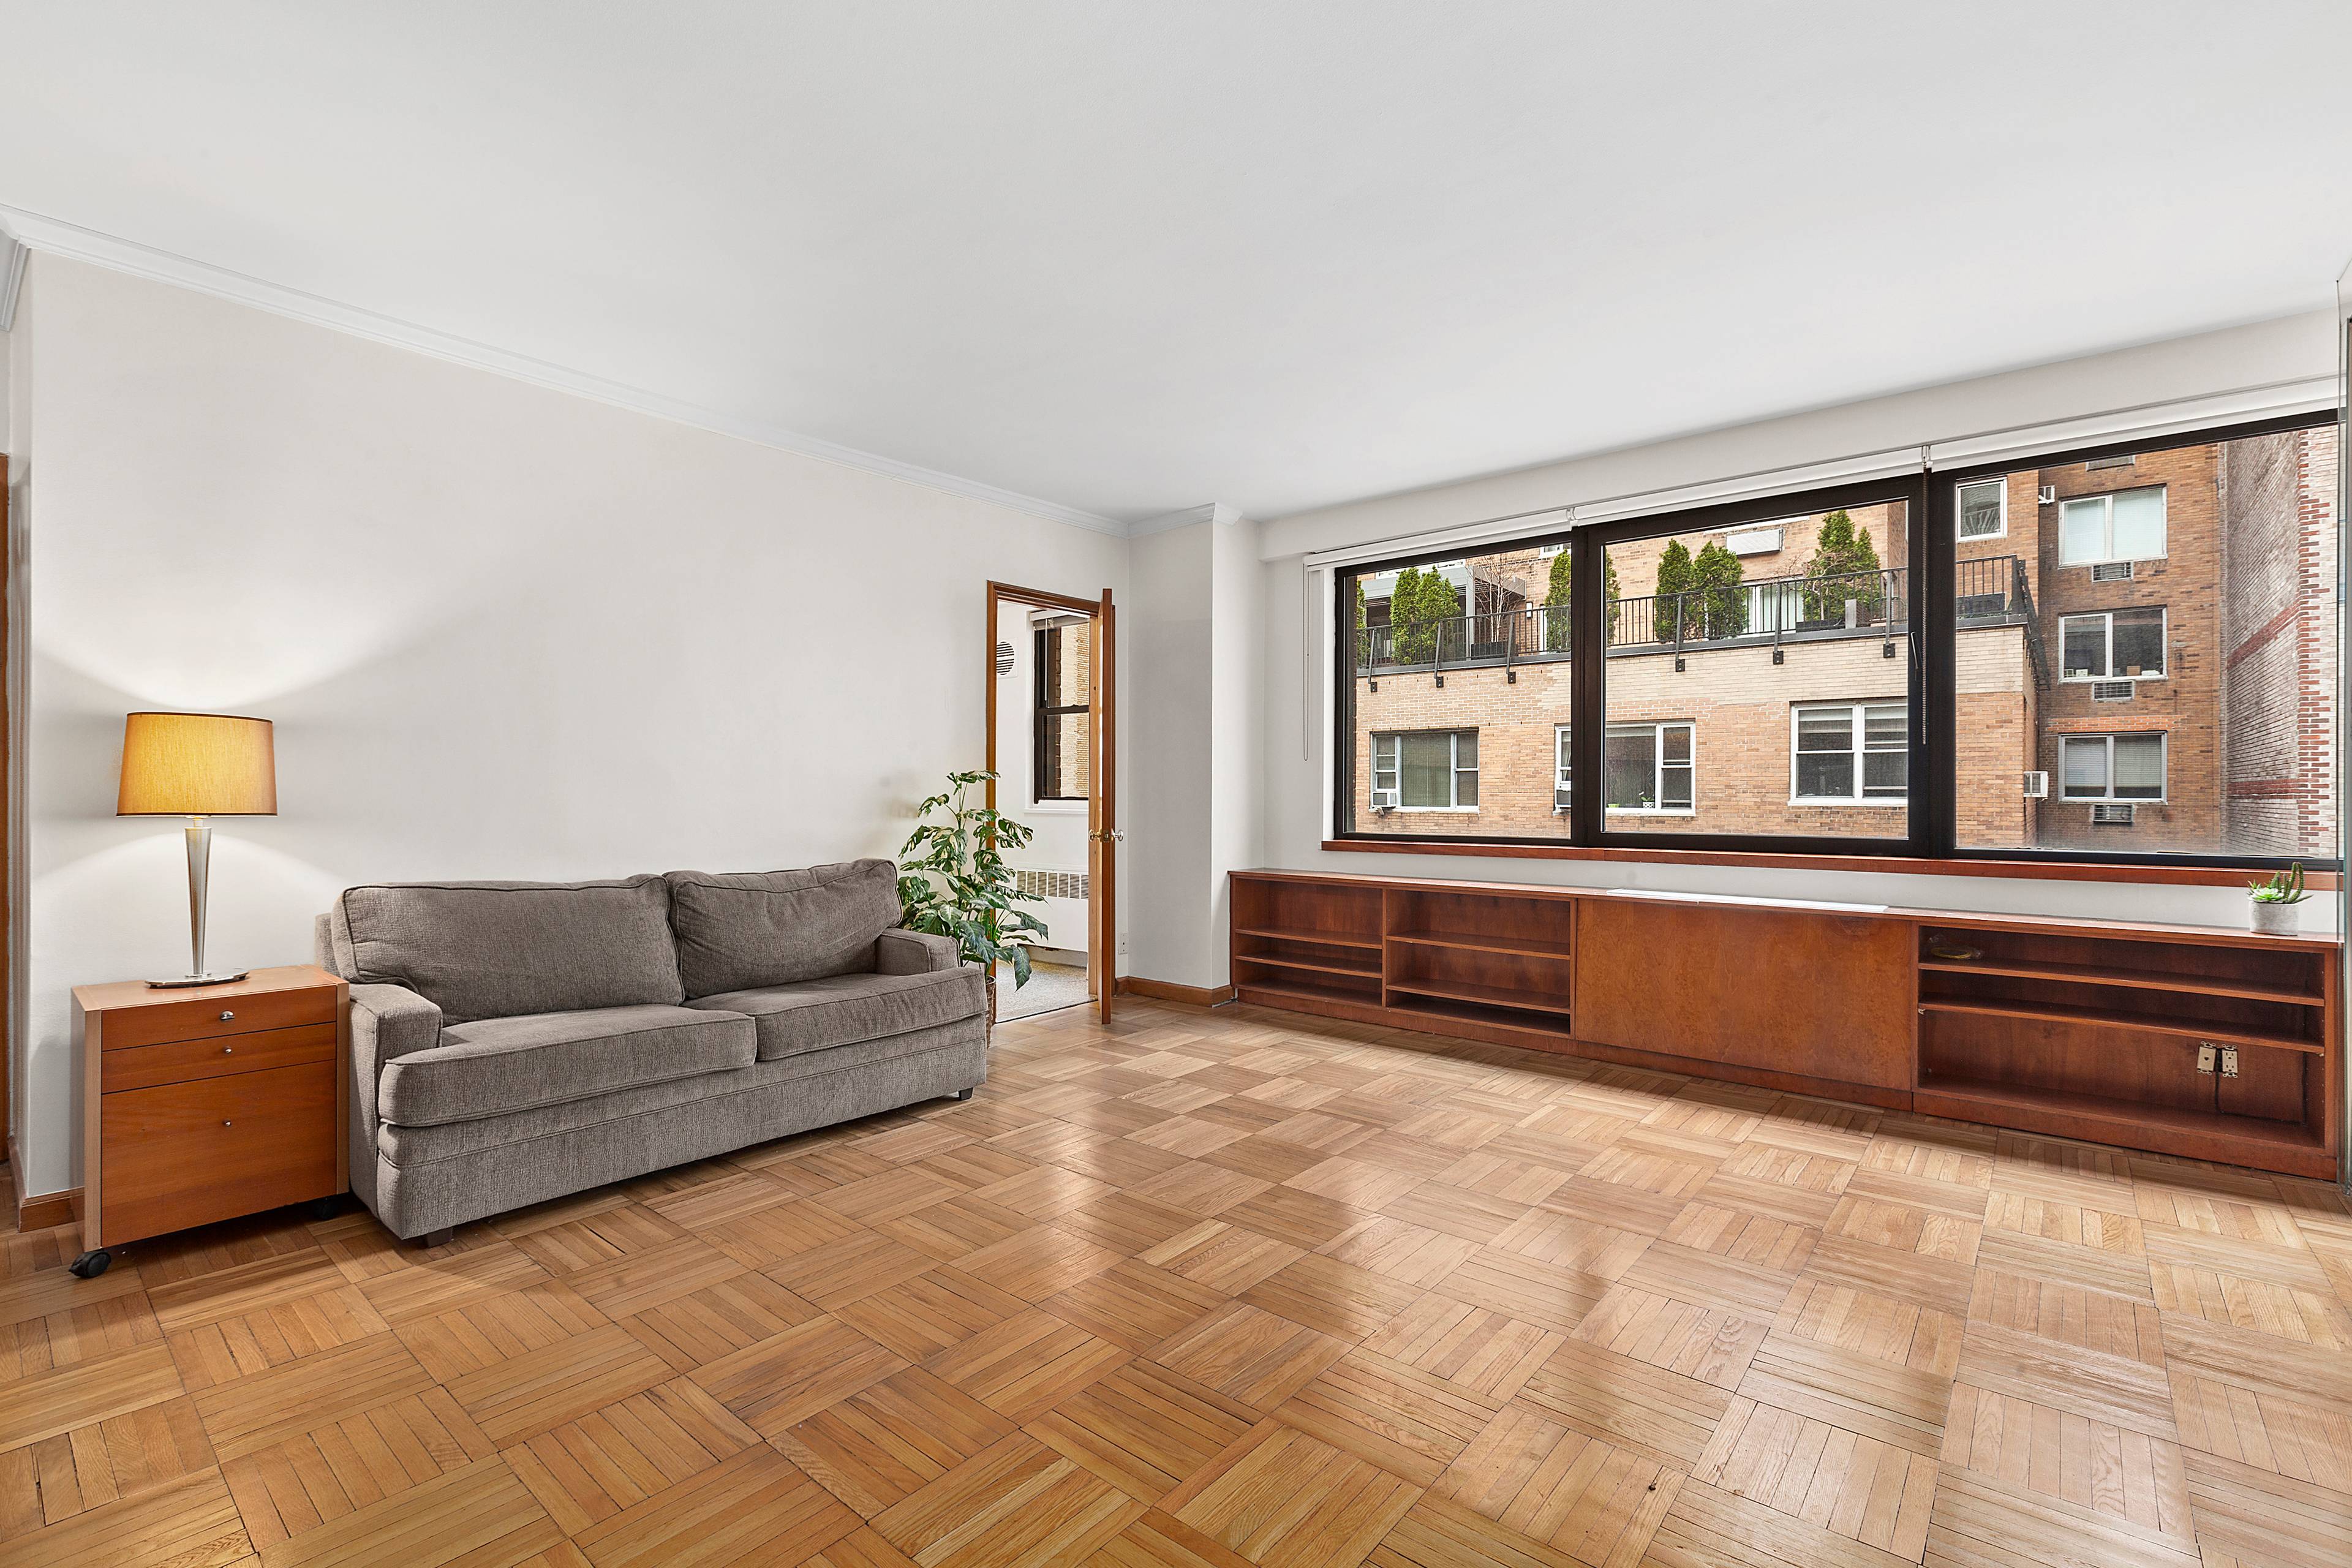 Presenting apartment 10G, a sunny amp ; oversized studio condominium on Central Park South offering low monthly taxes amp ; common charges, a large home office, abundant storage, a spacious ...